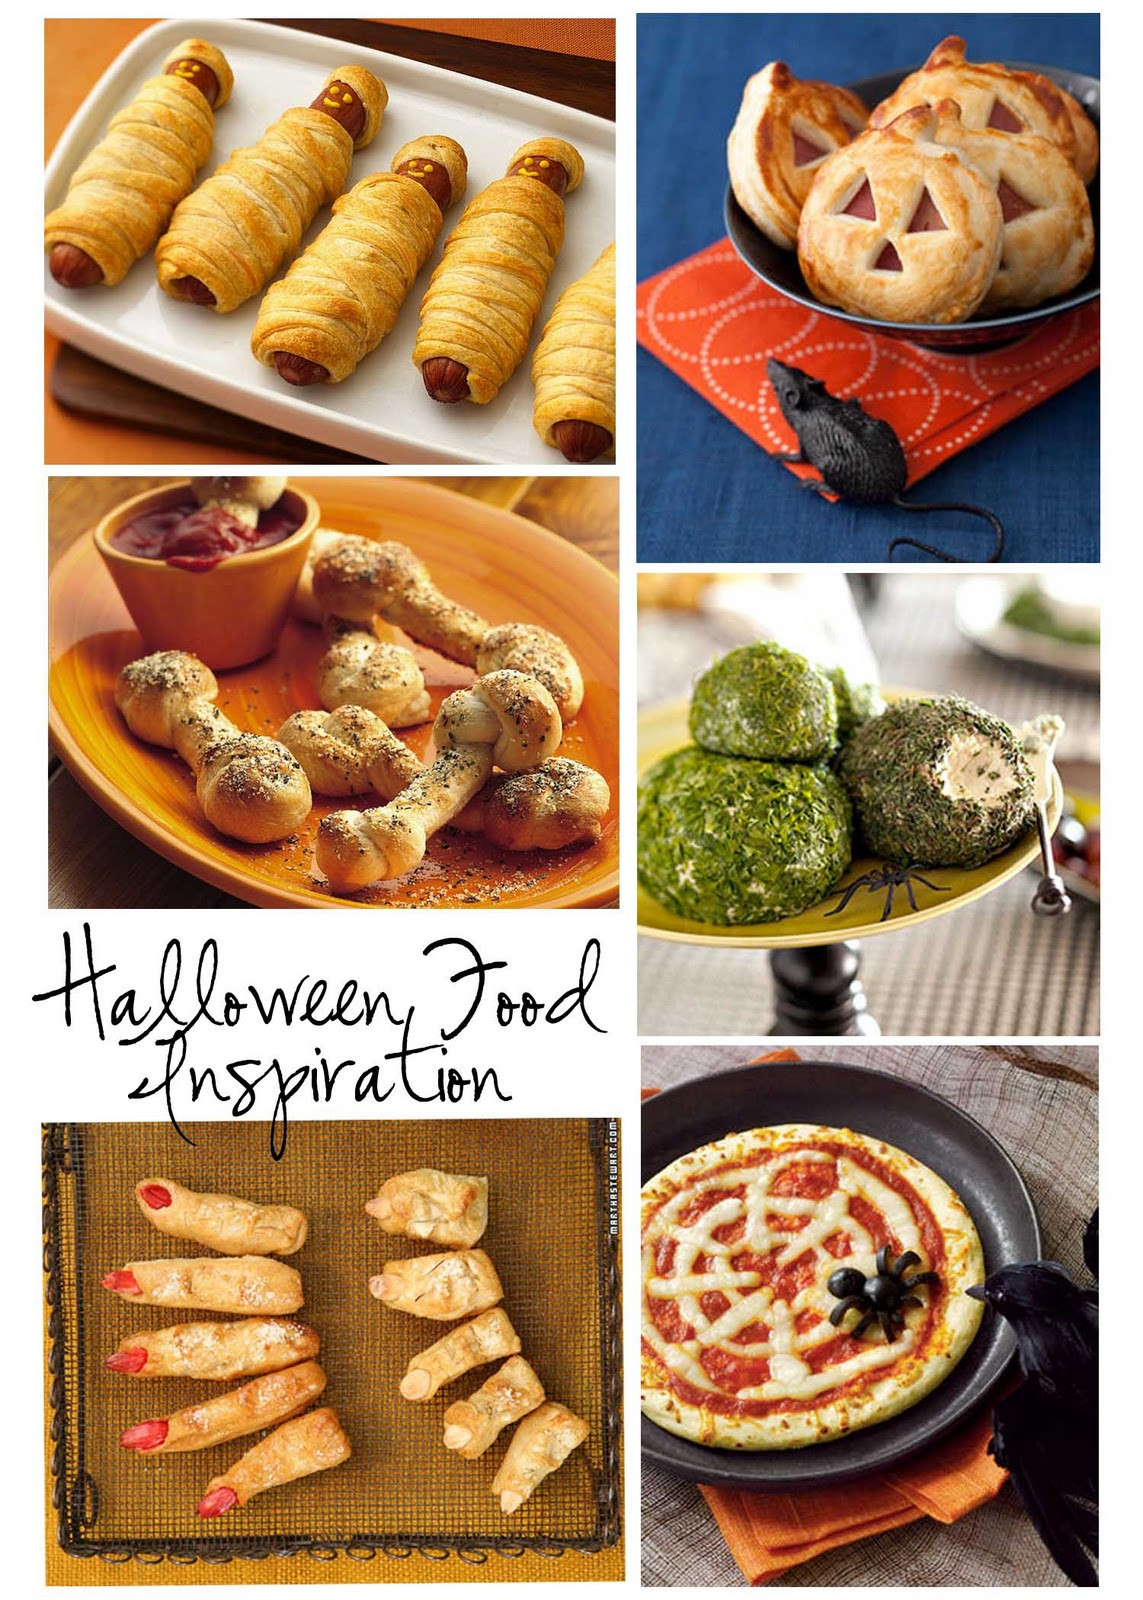 Scary Food Ideas For Halloween Party
 Room to Inspire Spooky Food Ideas